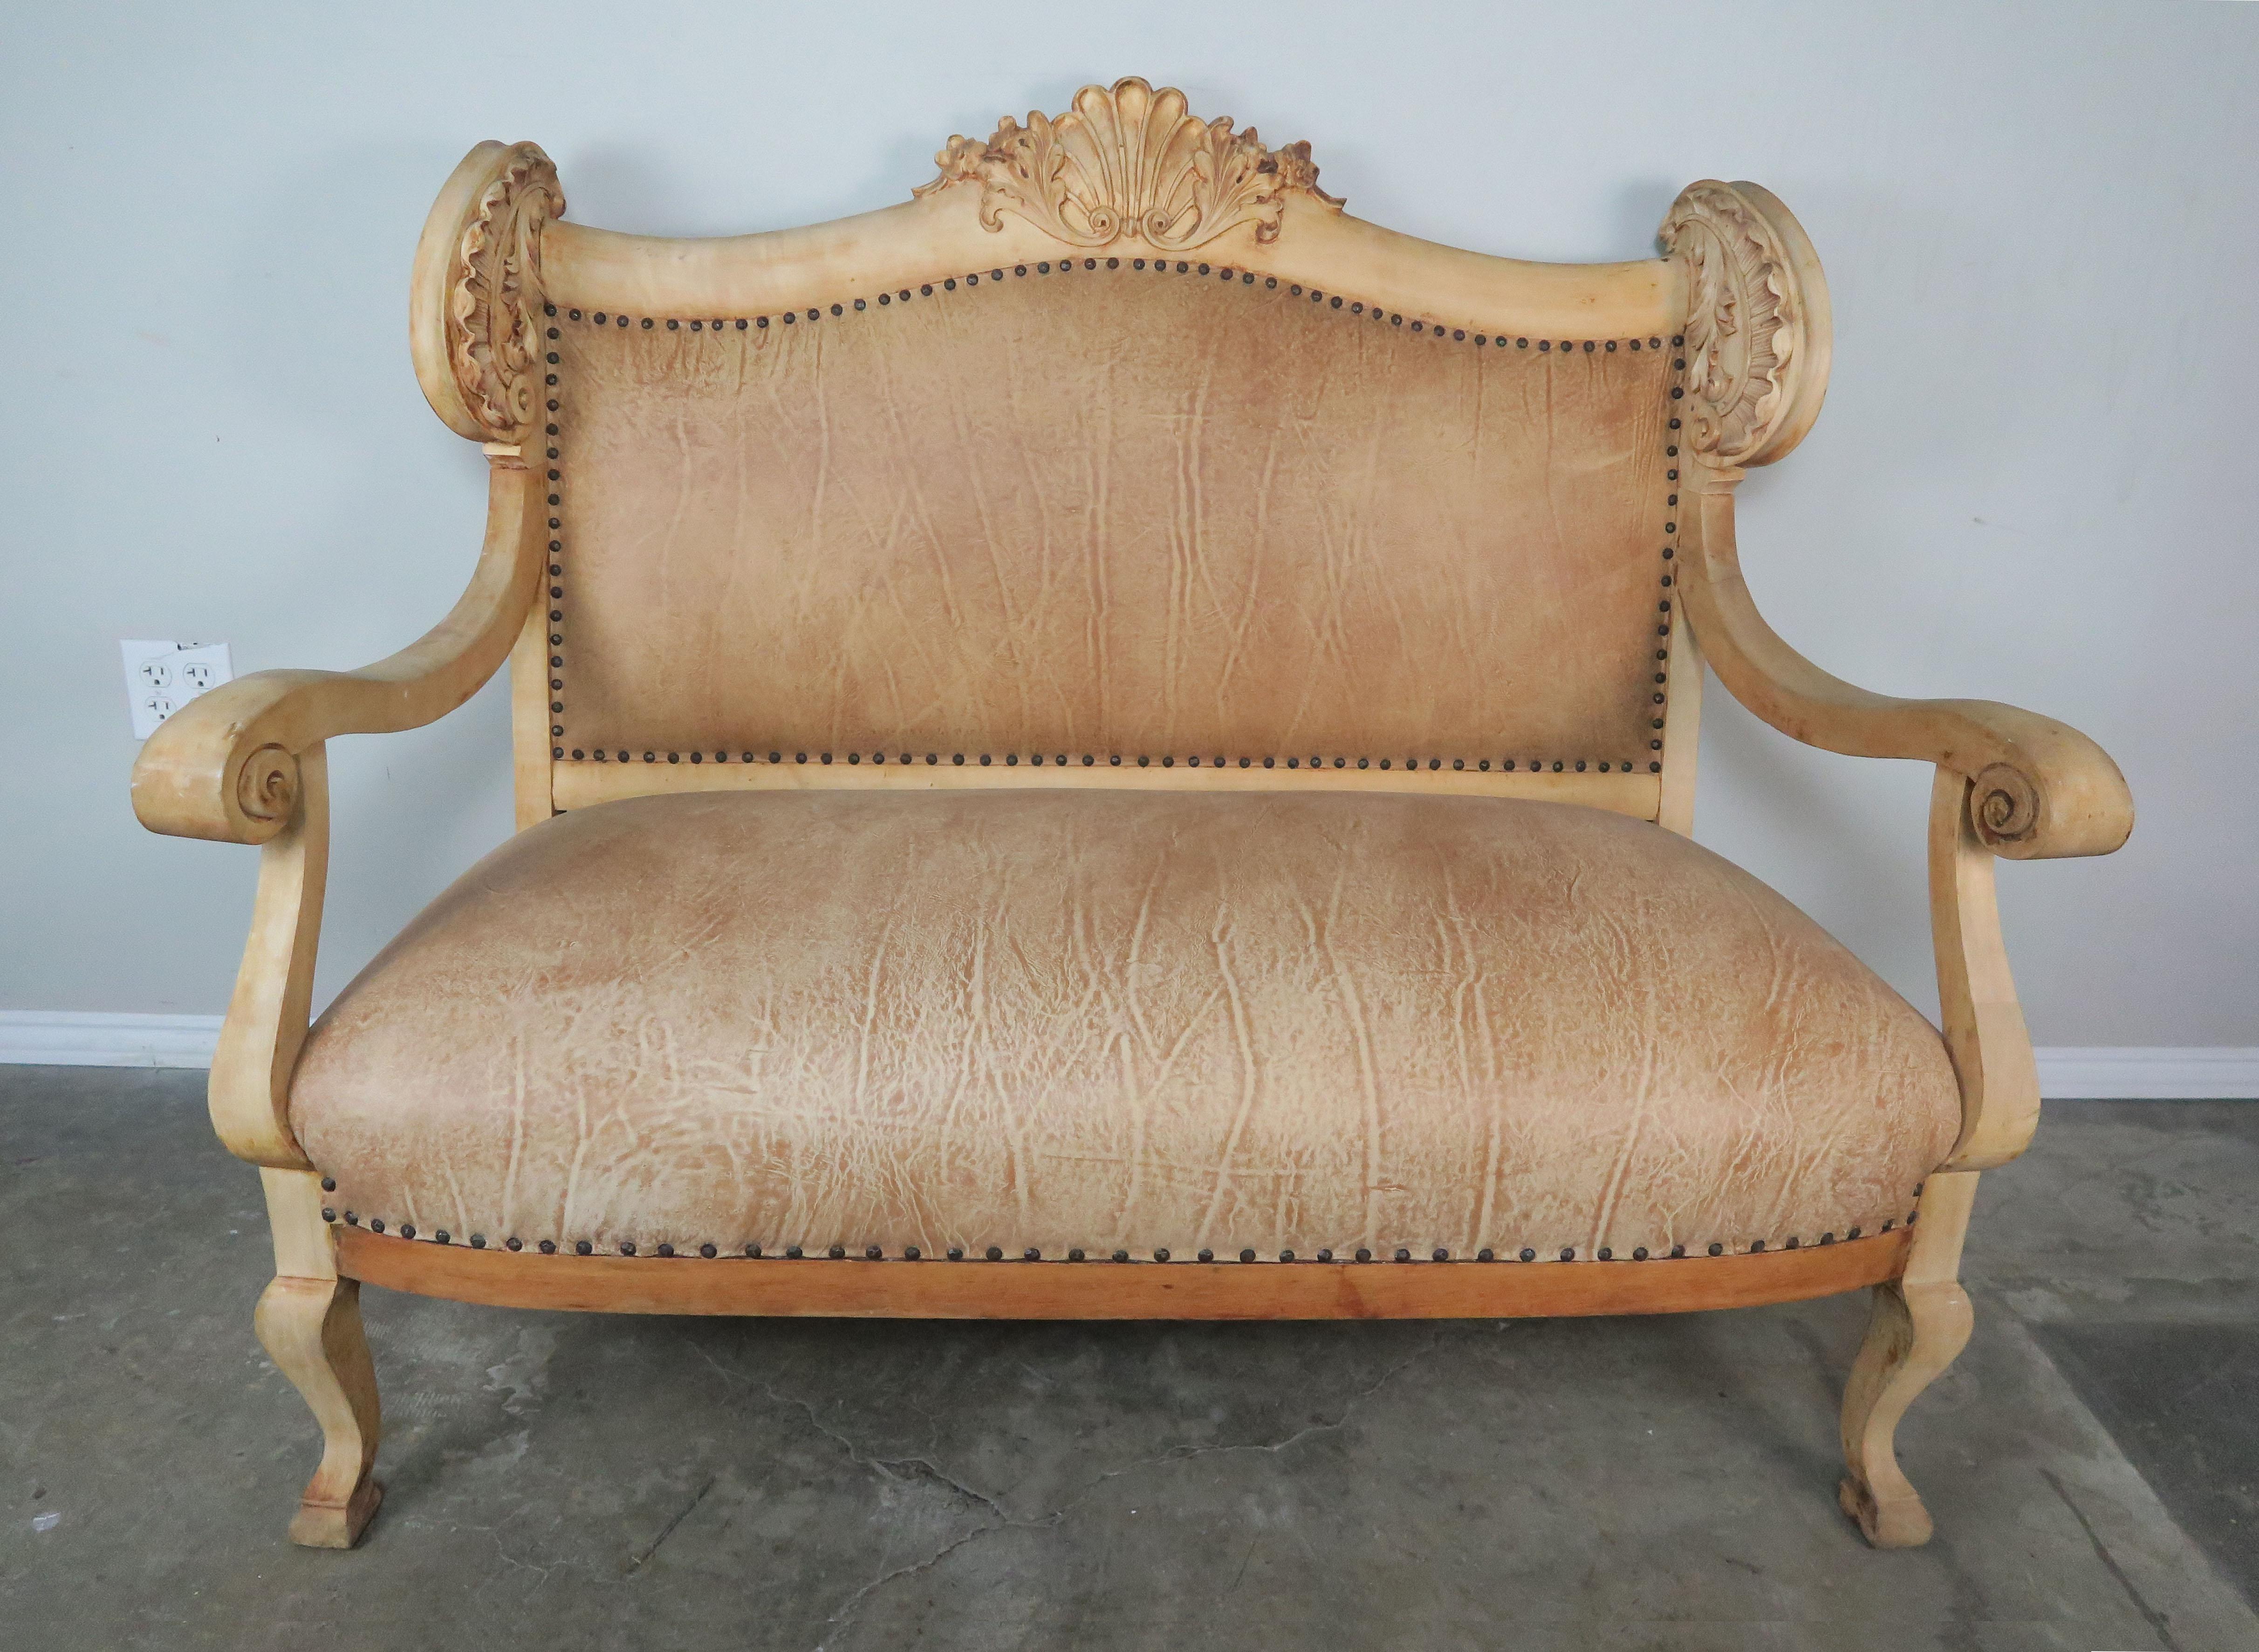 19th century French leather upholstered bleached walnut settee with antique brass nailhead trim detail. Beautiful acanthus leaf carving throughout. The leather is beautifully distressed and in great condition.
Measures: Seat height 20